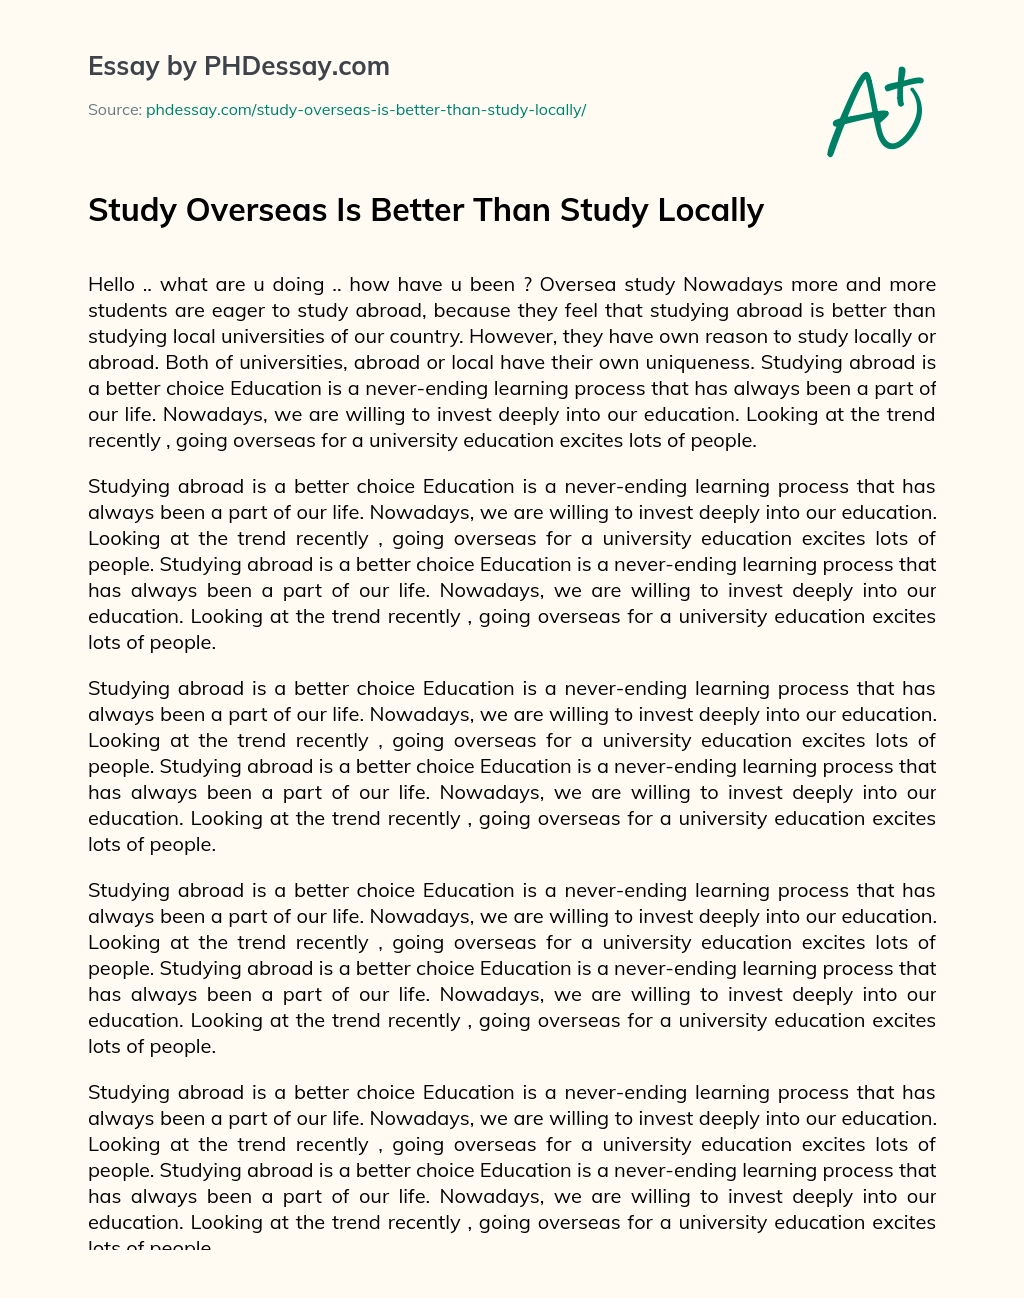 Study Overseas Is Better Than Study Locally essay